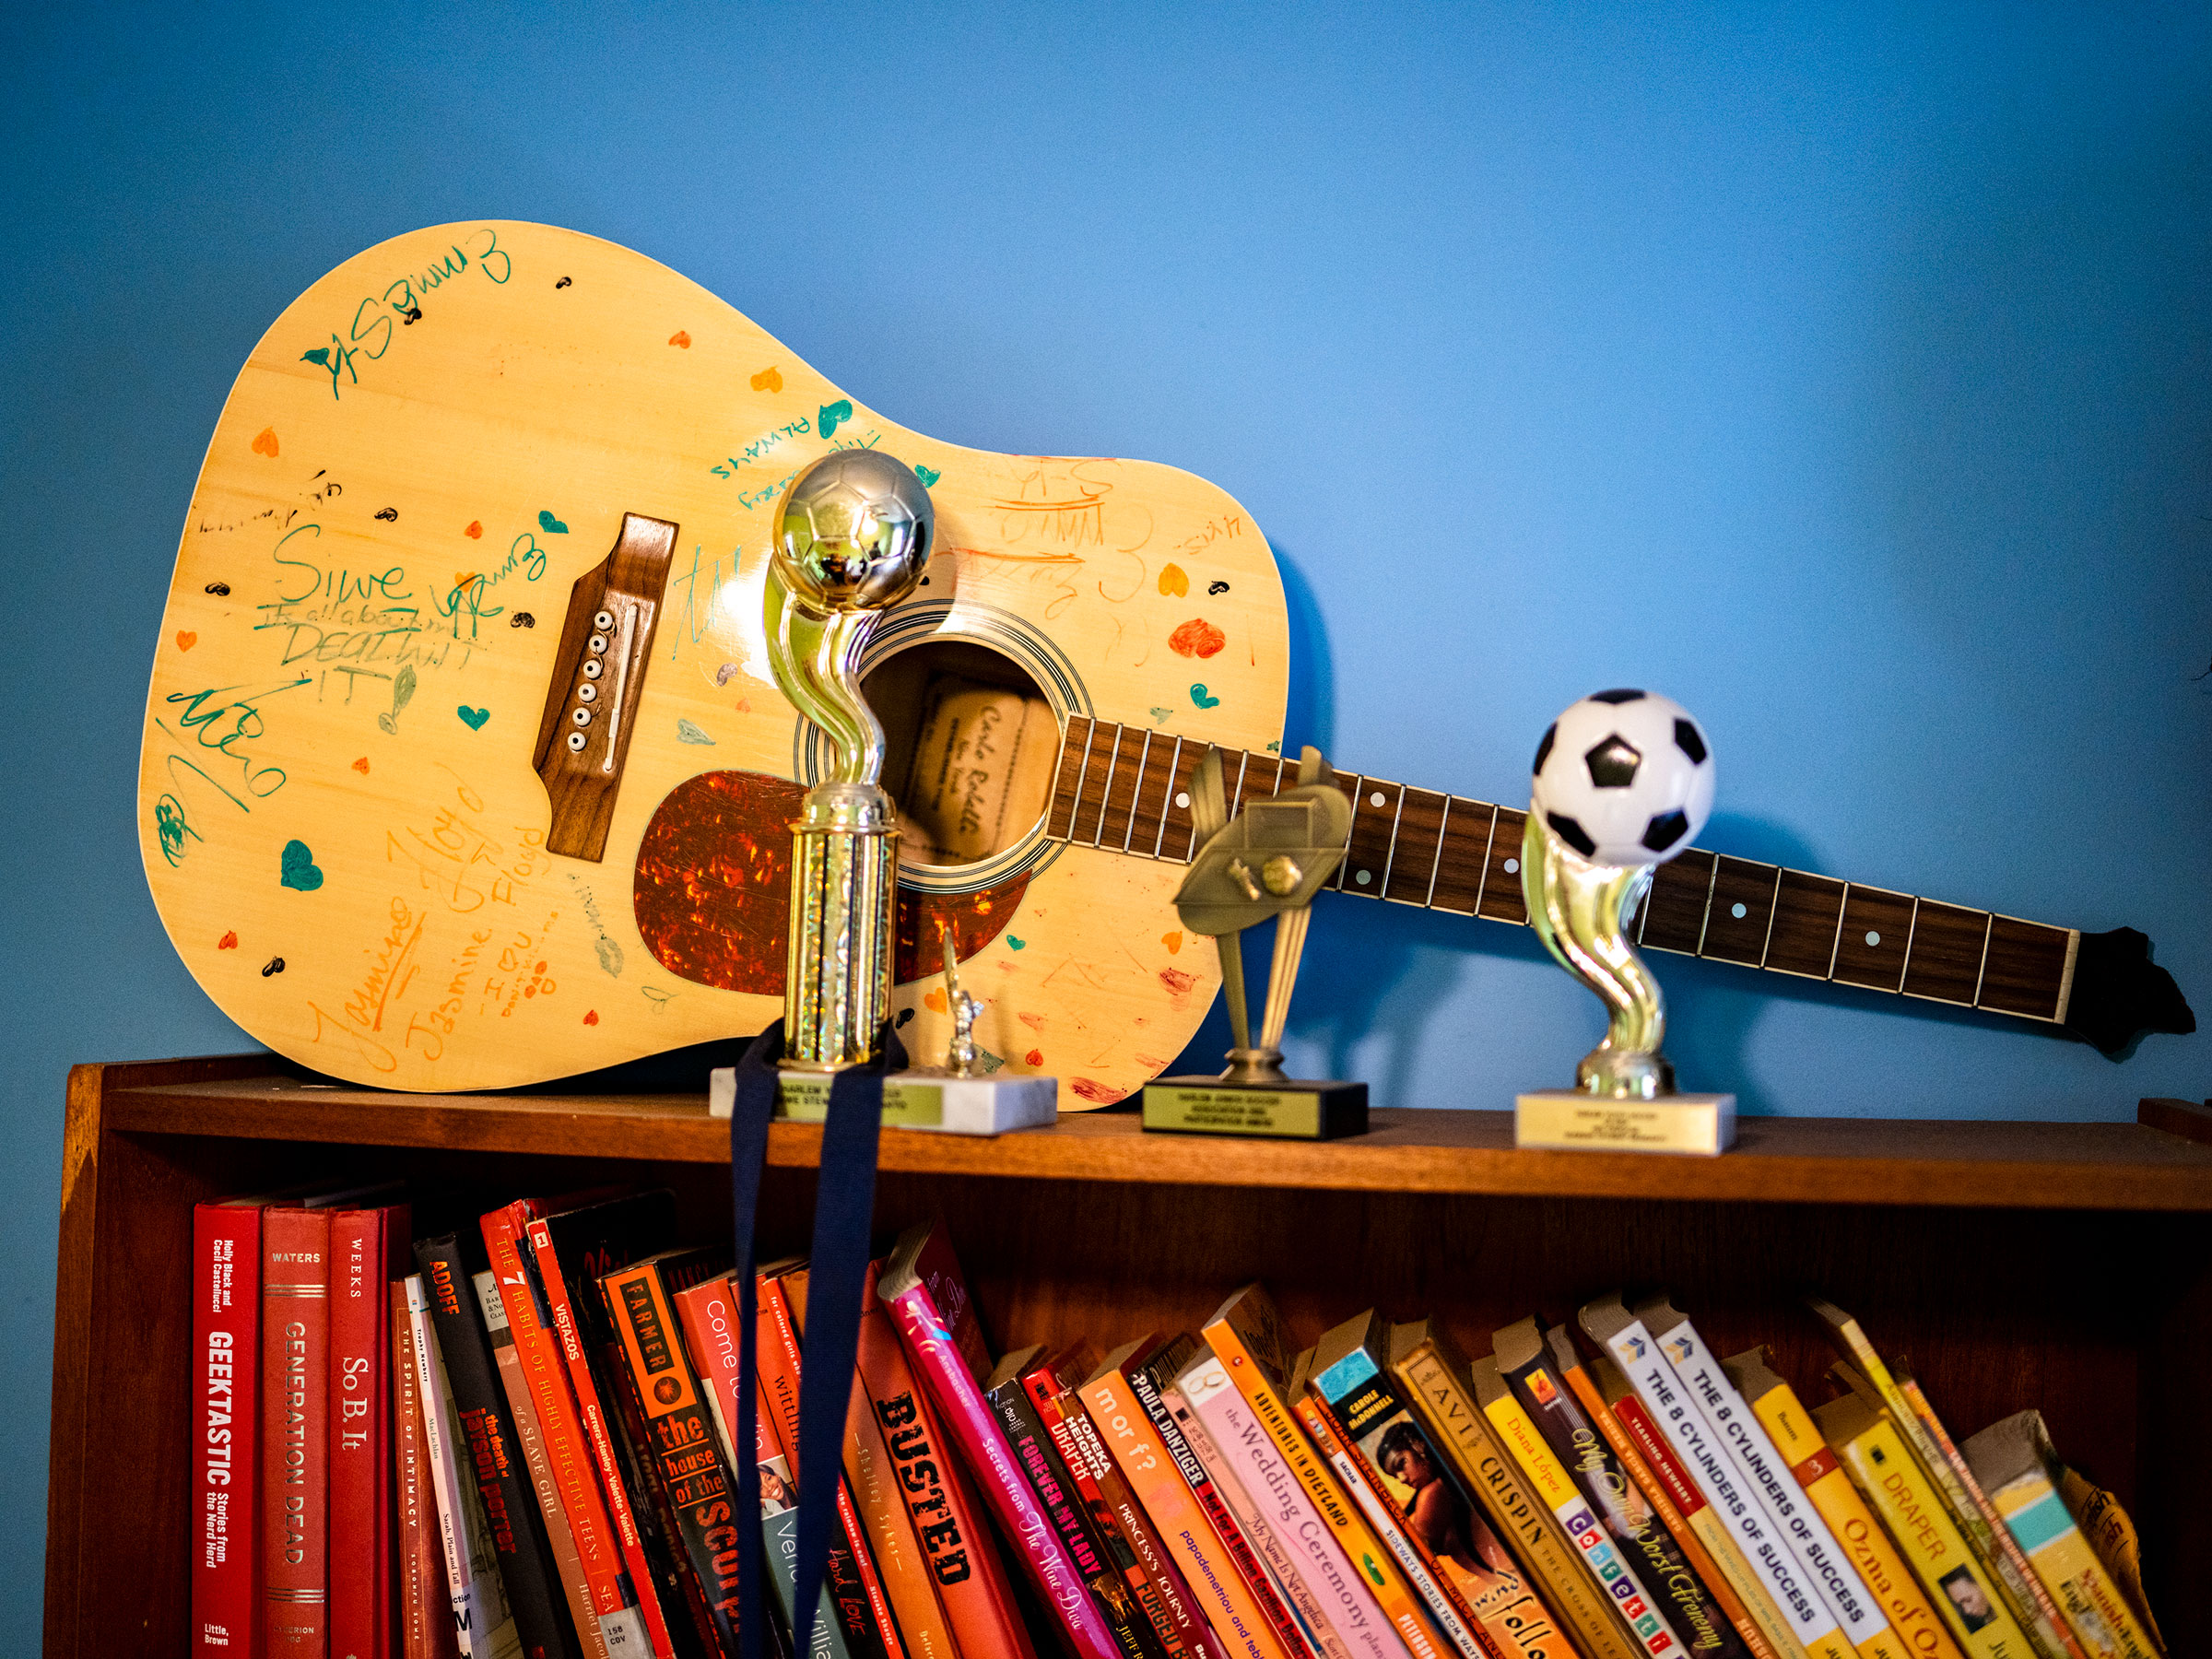 A guitar amongst trophies and books on a shelf in Siwe's bedroom. “She was brilliant," her mother said. "She was beautiful. She was a writer. She was a guitar player. She was a dancer." (Elias Williams for TIME)